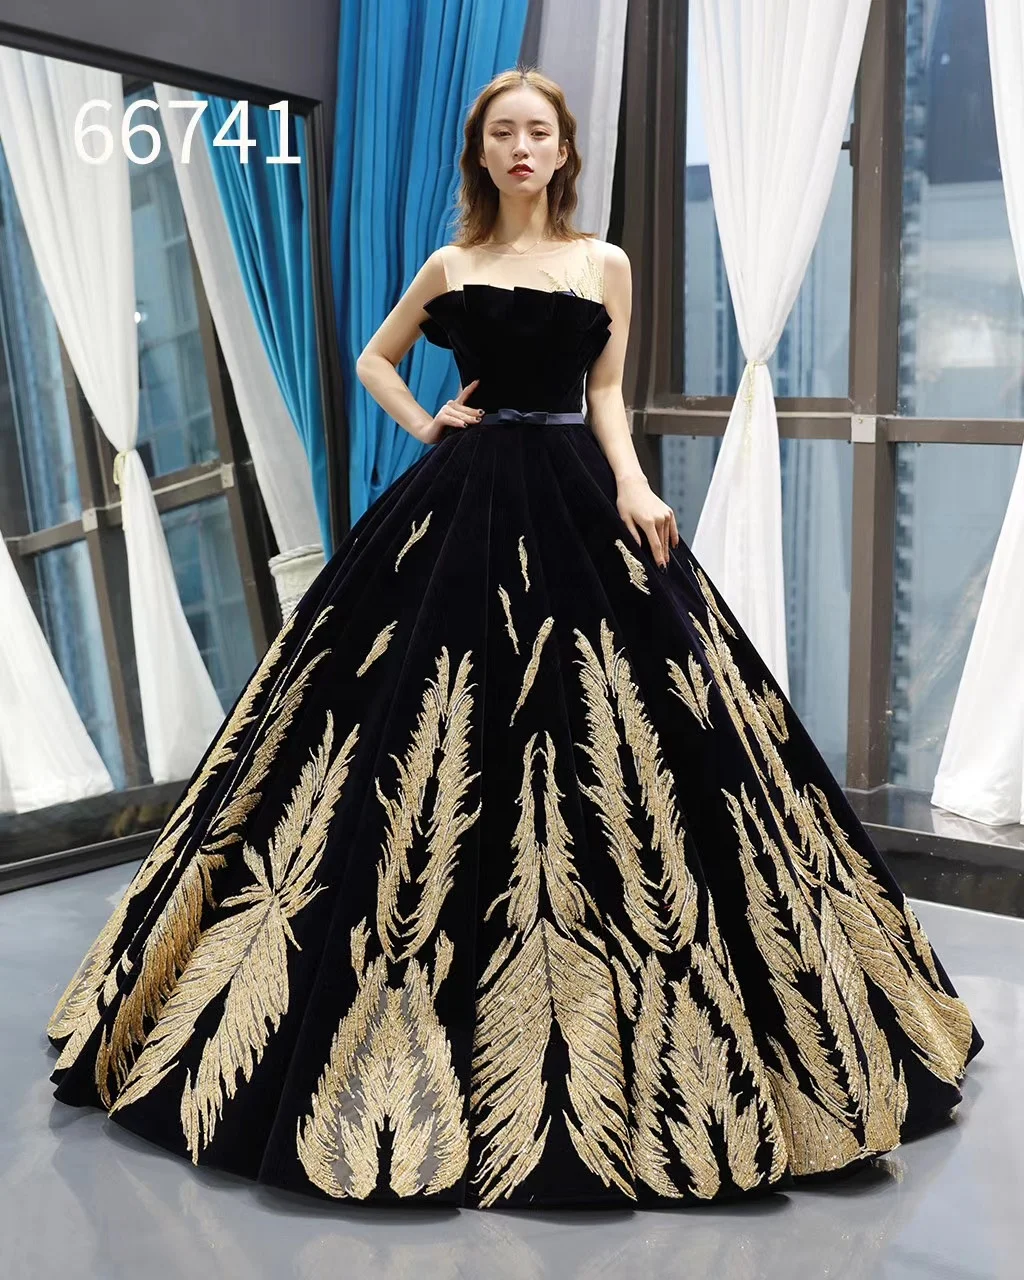 

2020 high quality elegant navy prom gown luxury ball gown designer long gowns dubai evening dress, As picture or your request